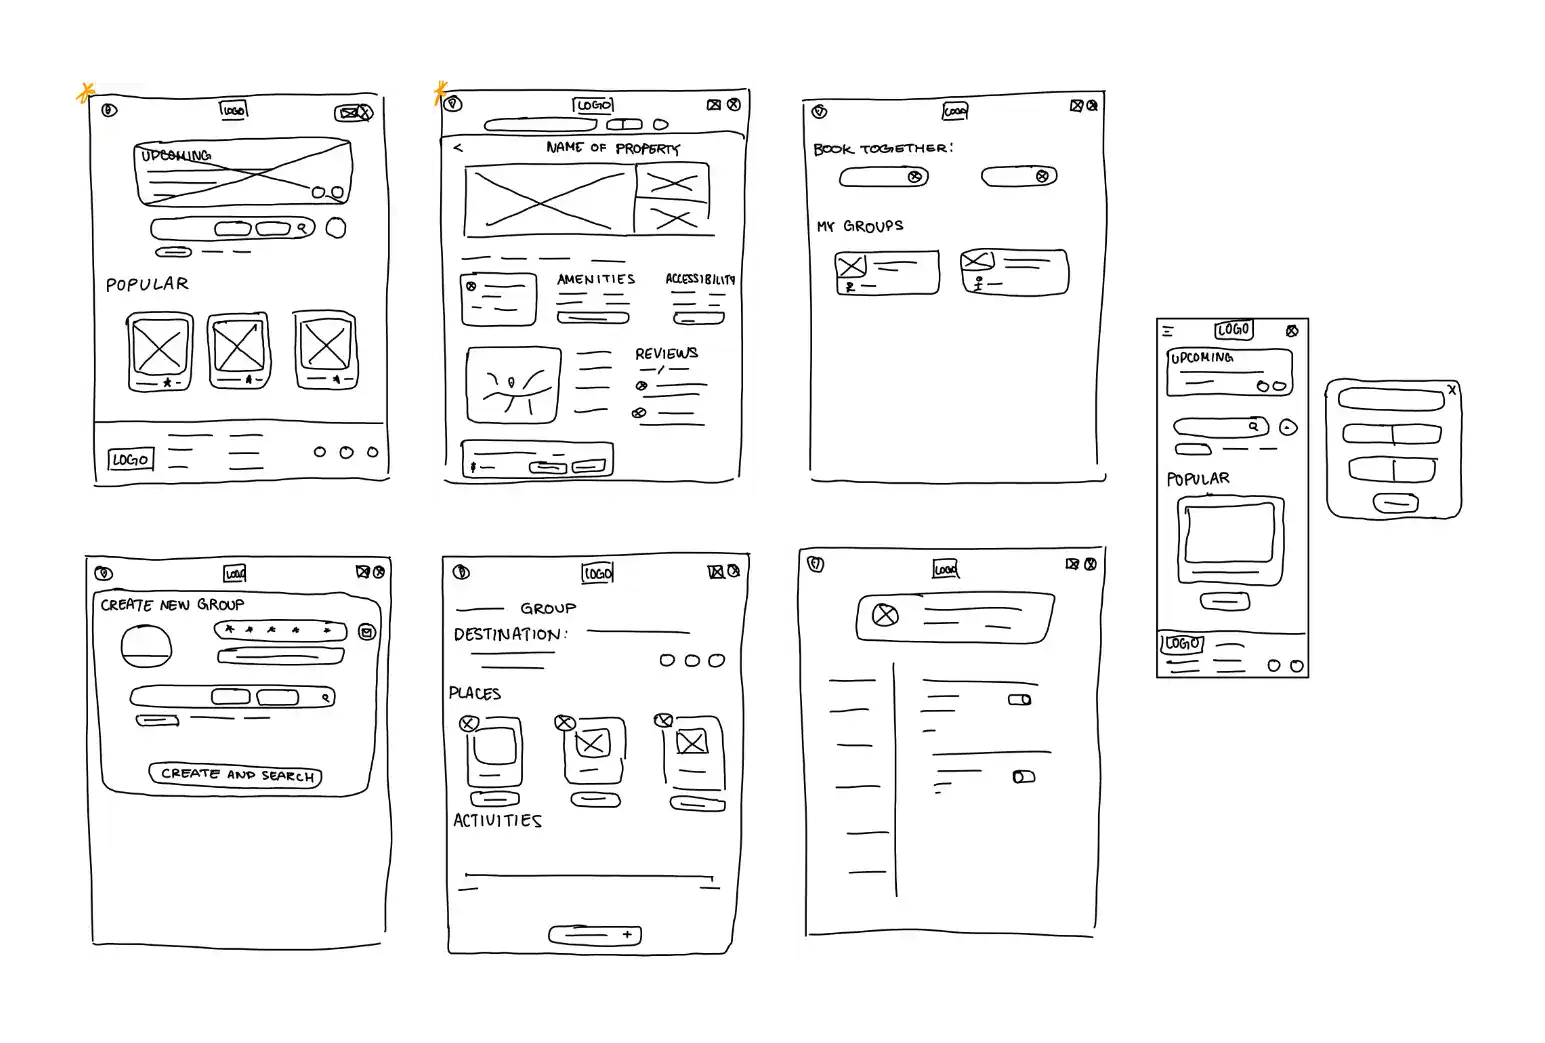 Paper wireframe of the oasis website